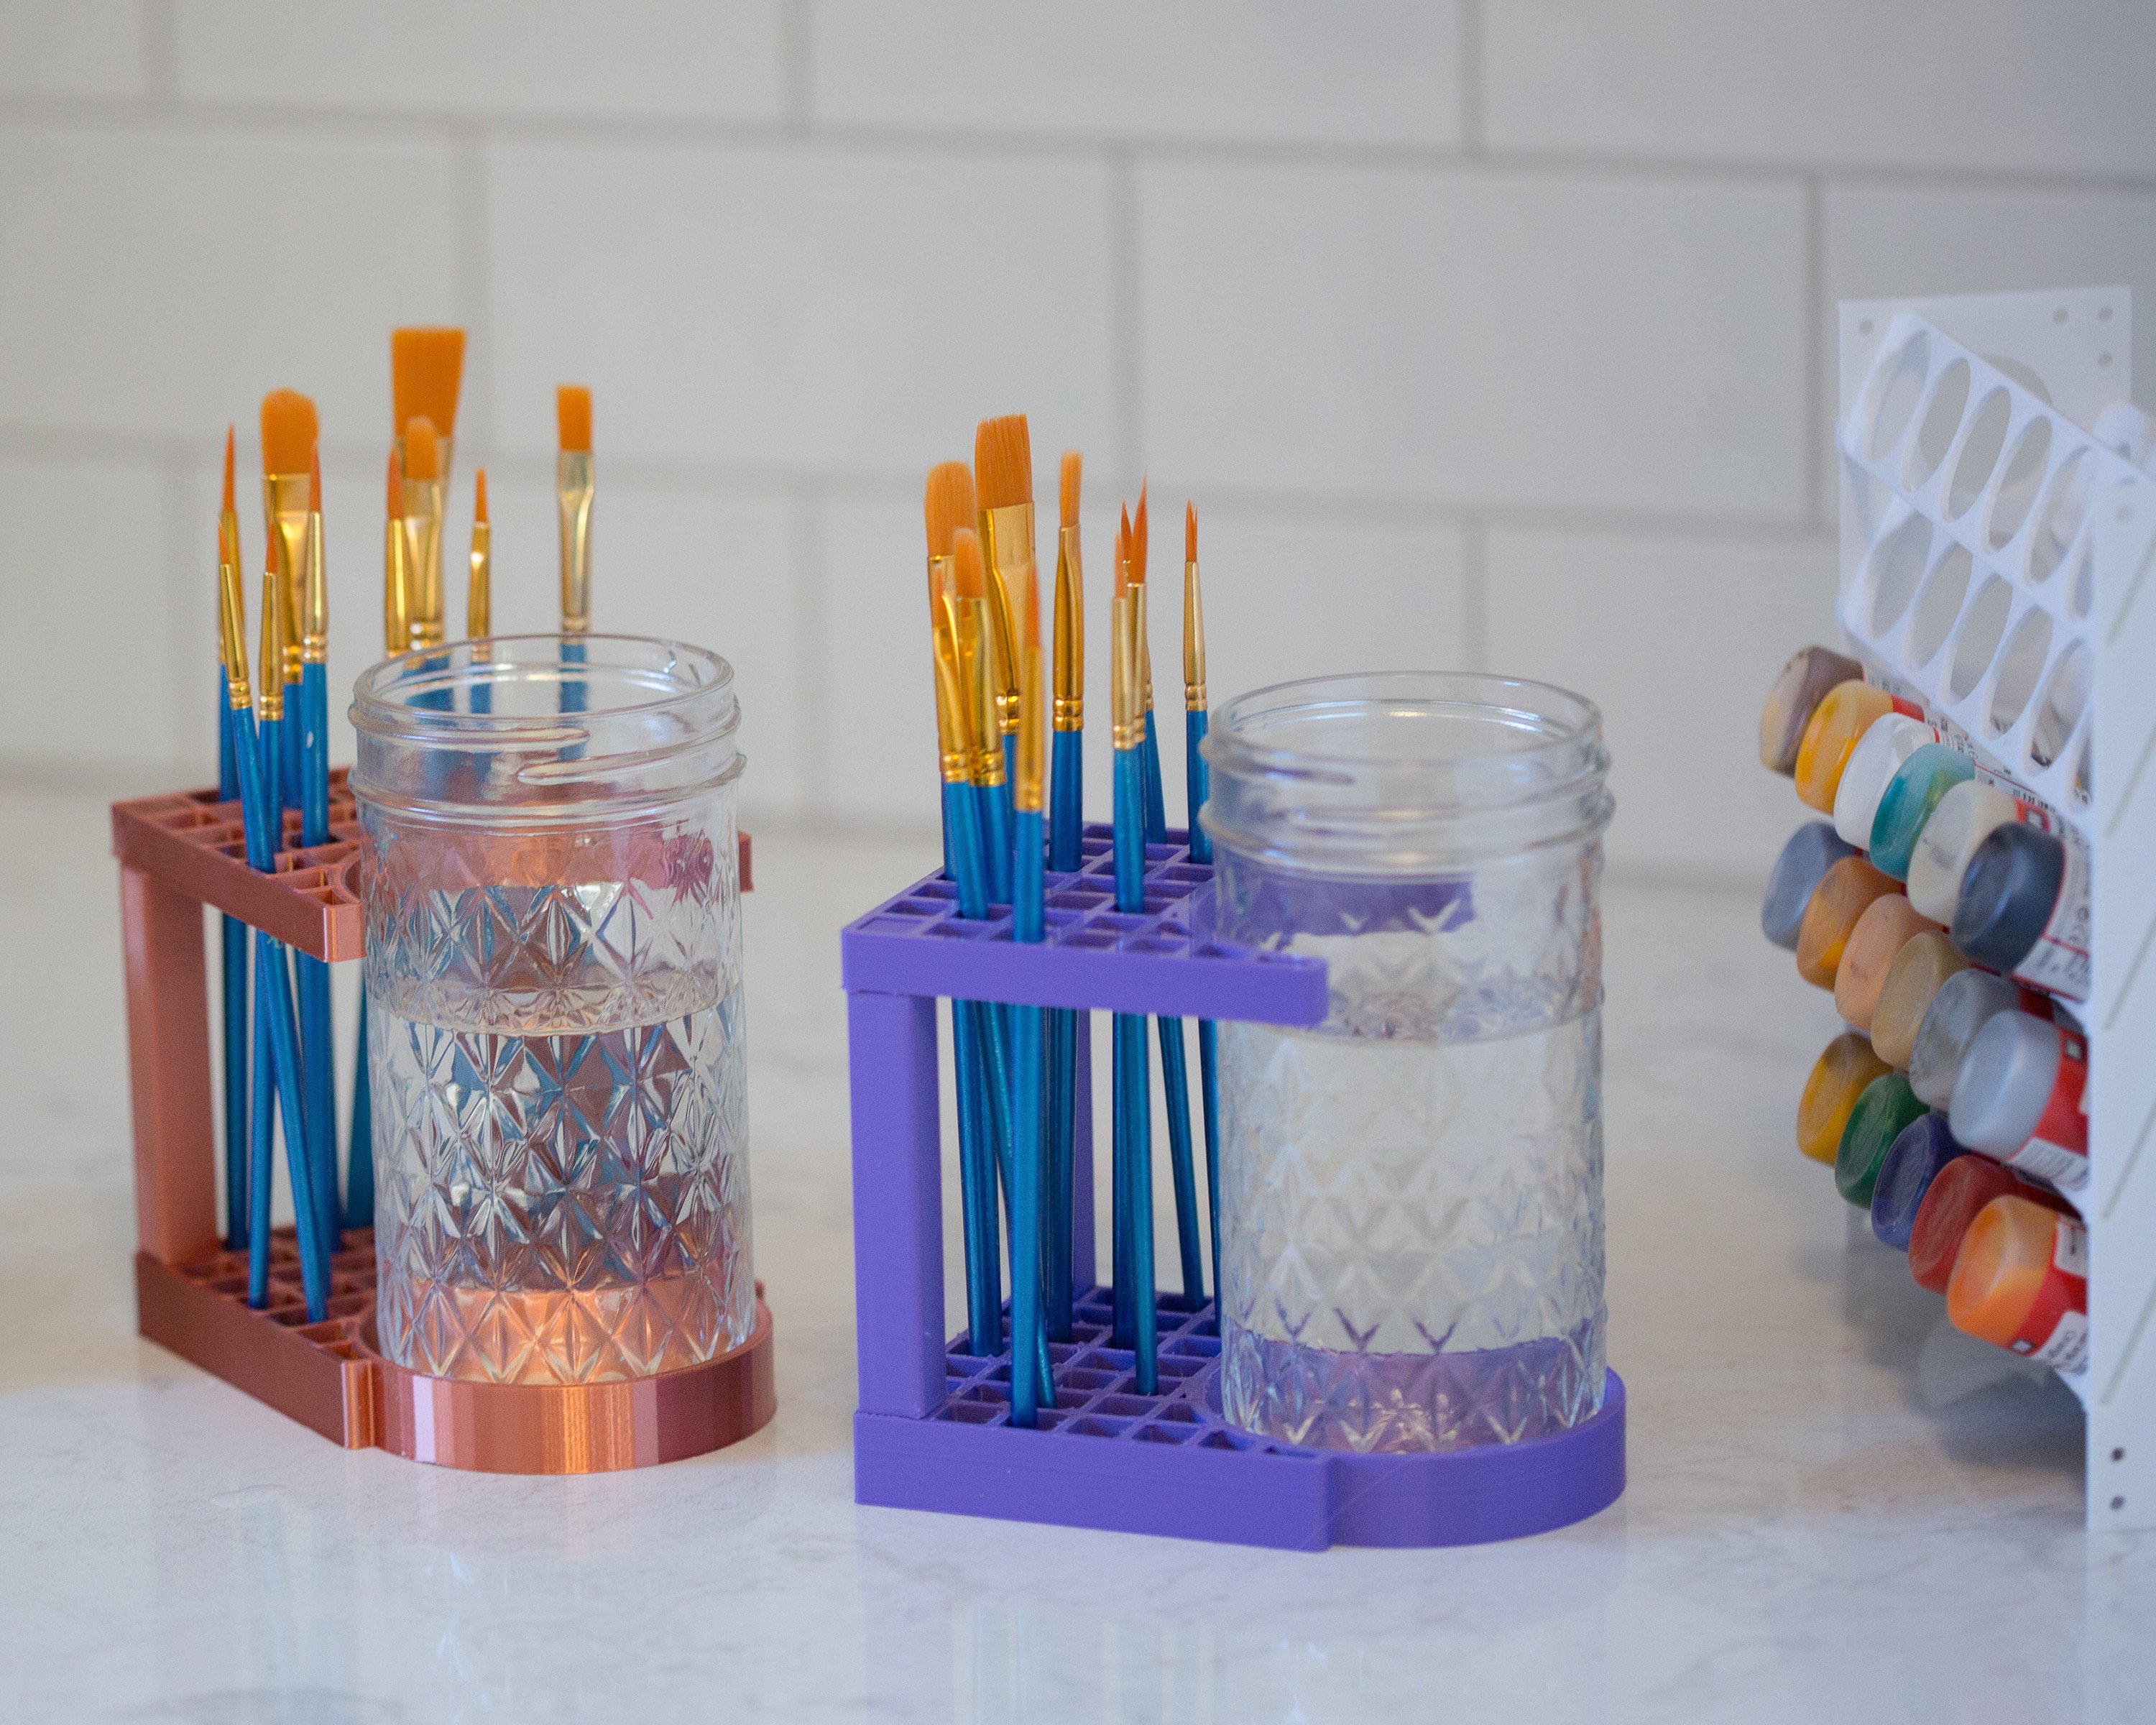 Paint brush drying rack, must have! …